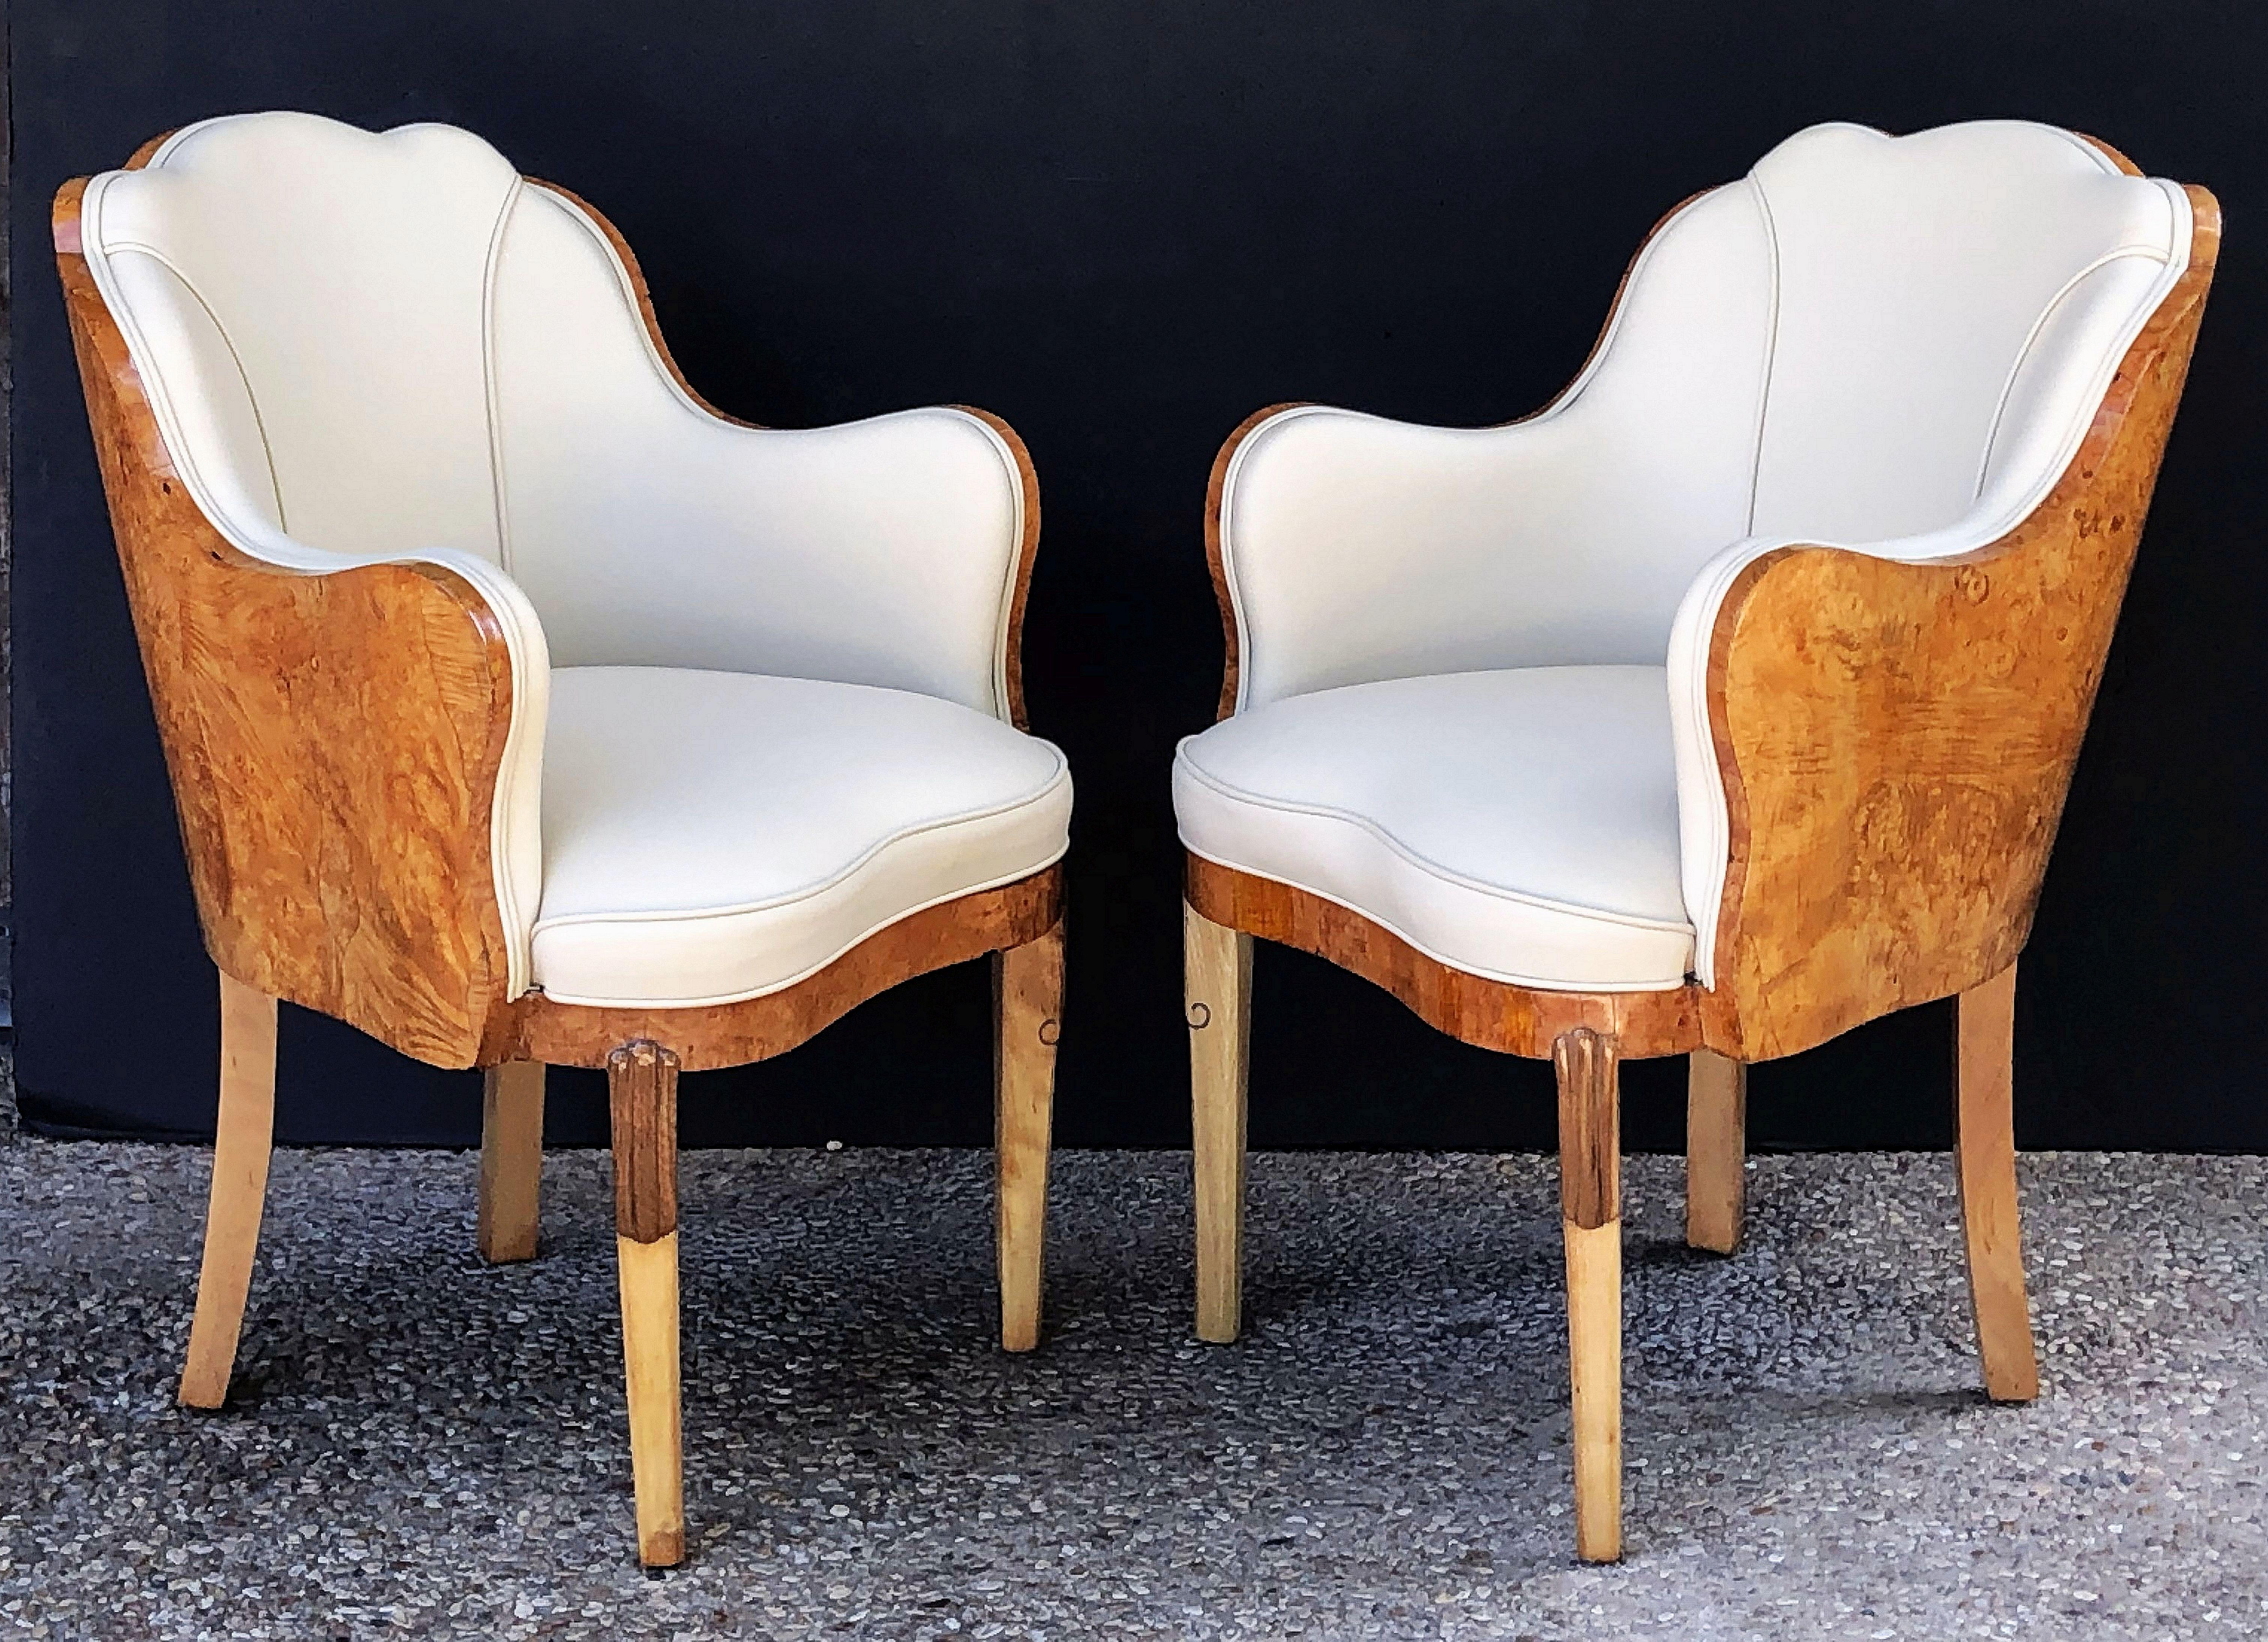 A fine pair of Art Deco era chairs or armchairs, circa 1930, by the celebrated designer, Maurice Adams, each chair featuring burr walnut wraps and upholstered cream leather, with a serpentine shape back and comfortable seats.

Individually priced